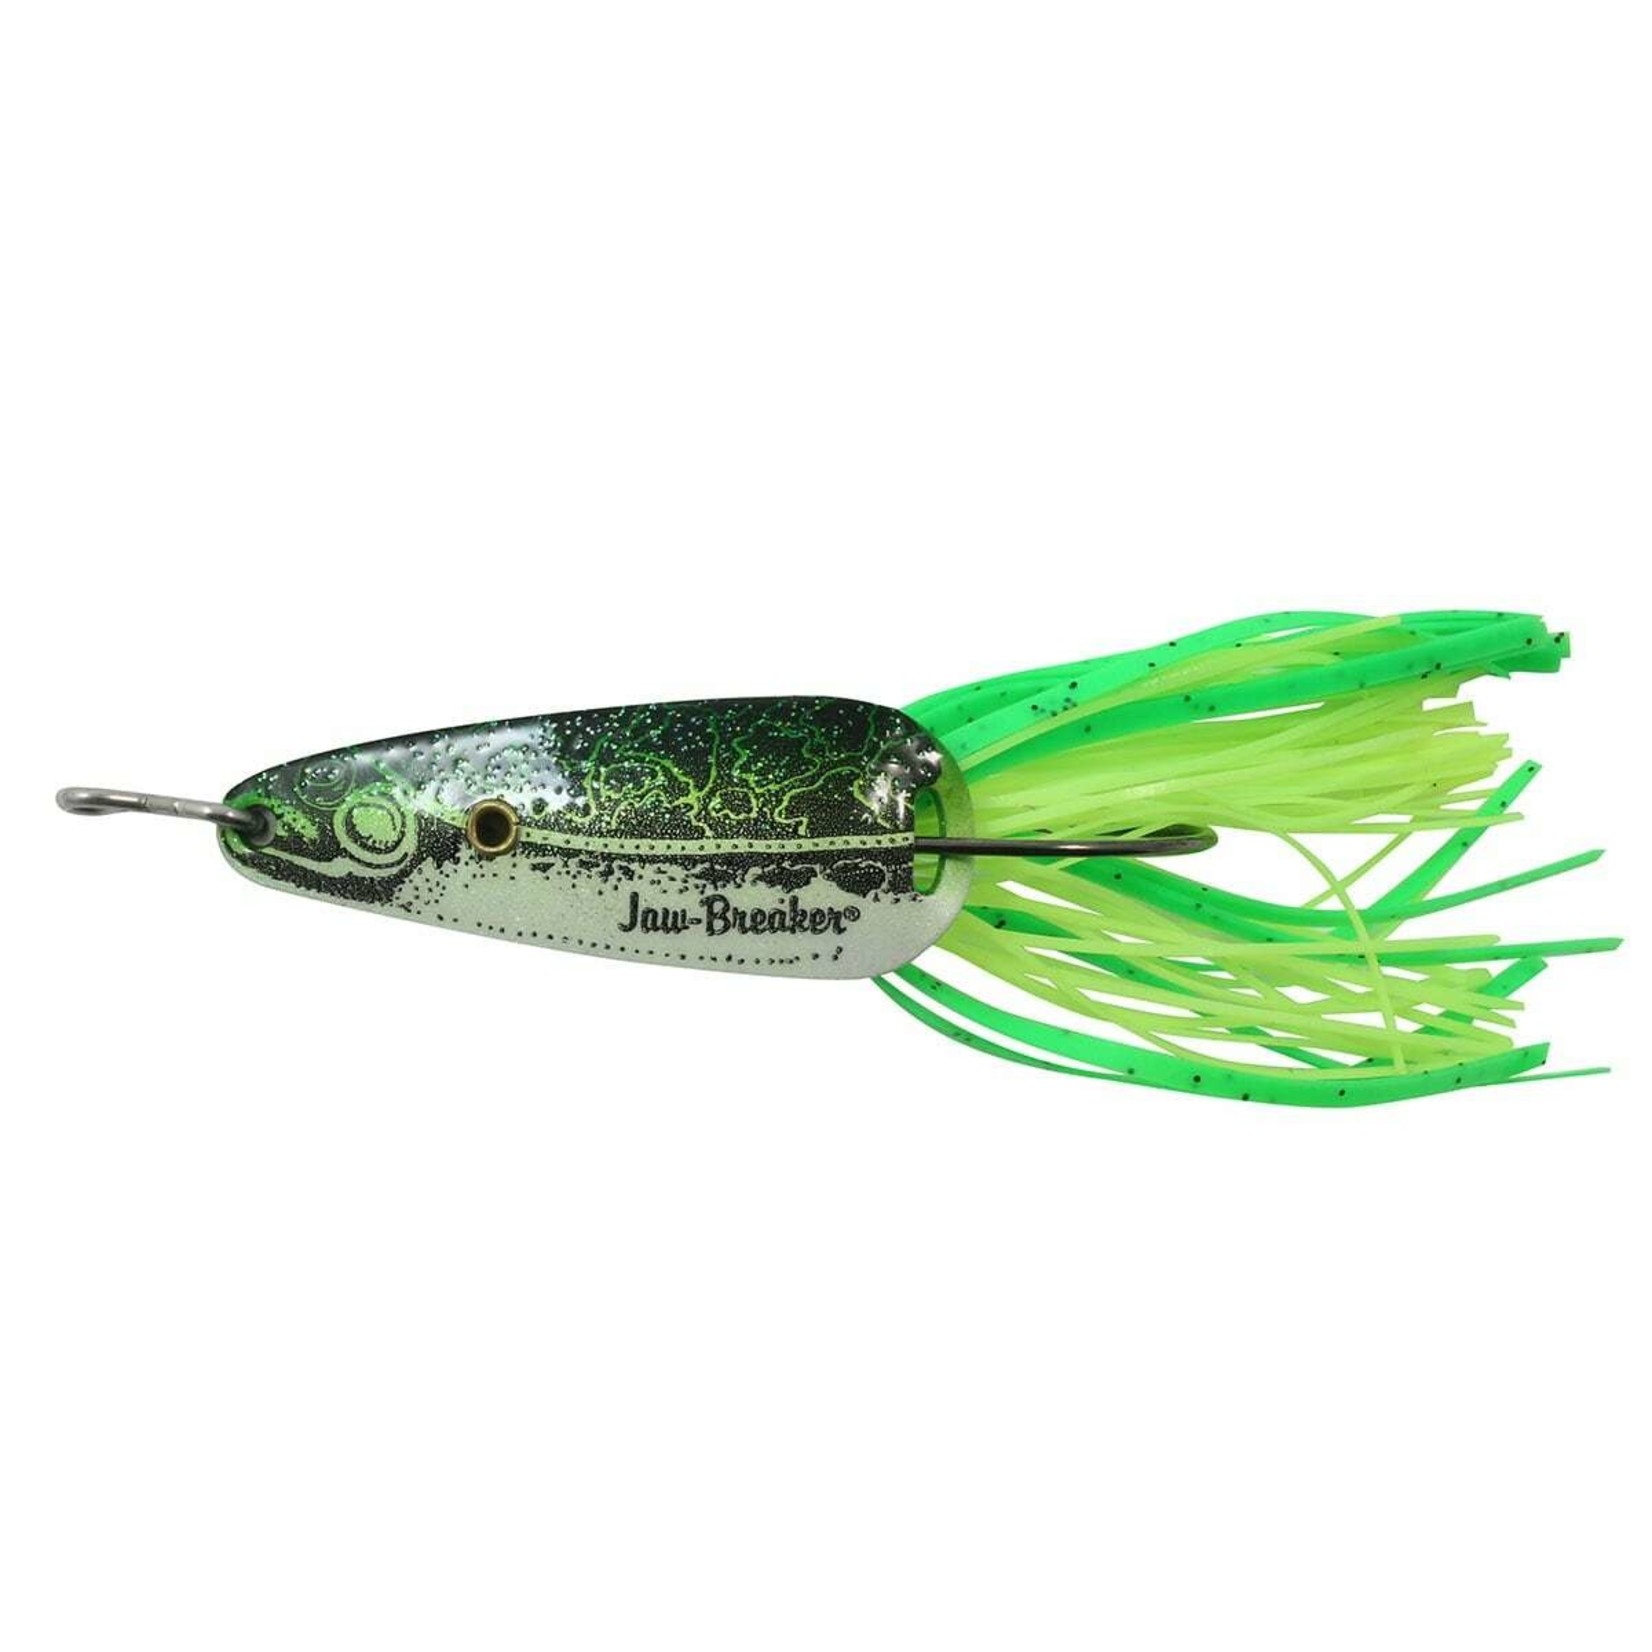 Northland Fishing Tackle Jaw-Breaker Weedless Spoon